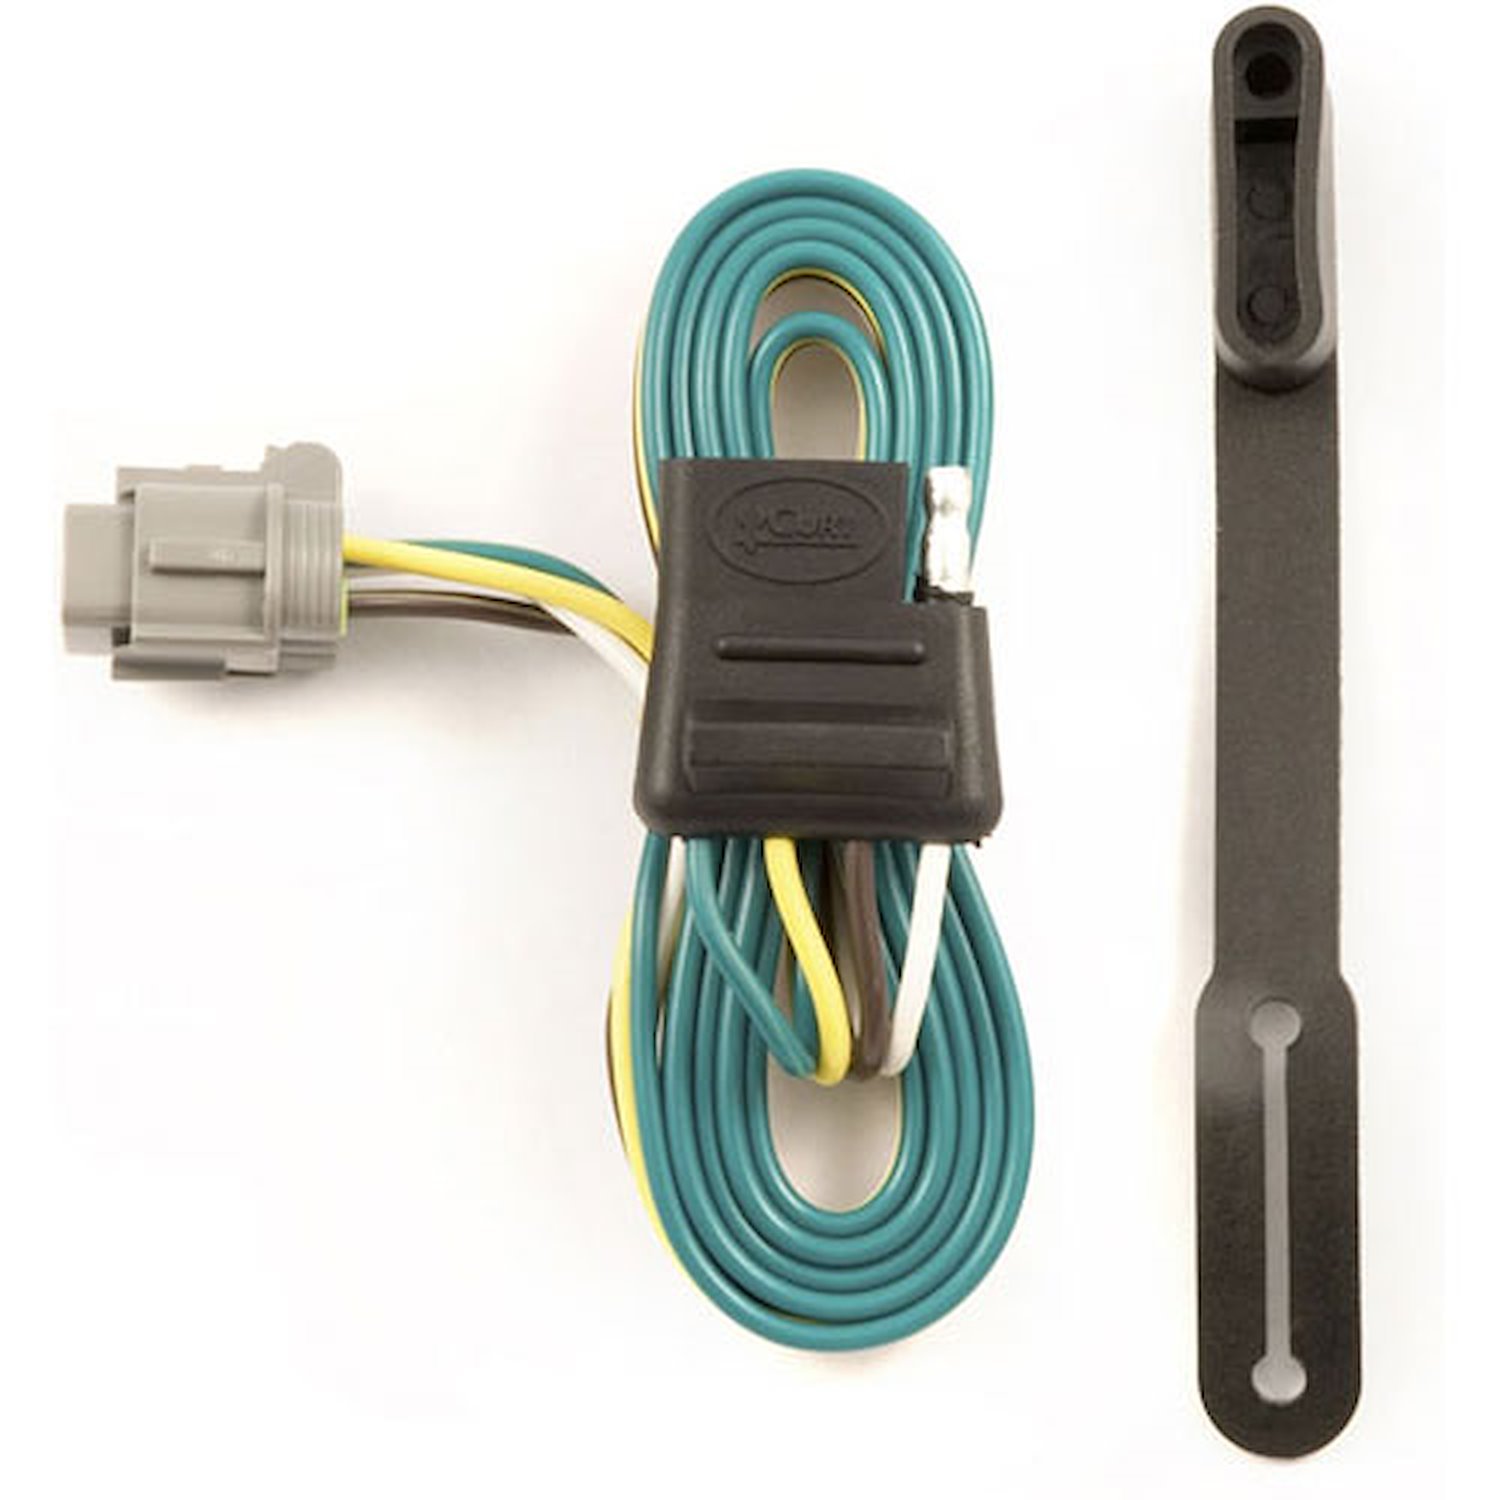 T-Connector / 2 Wire Electrical System 2005-16 Frontier